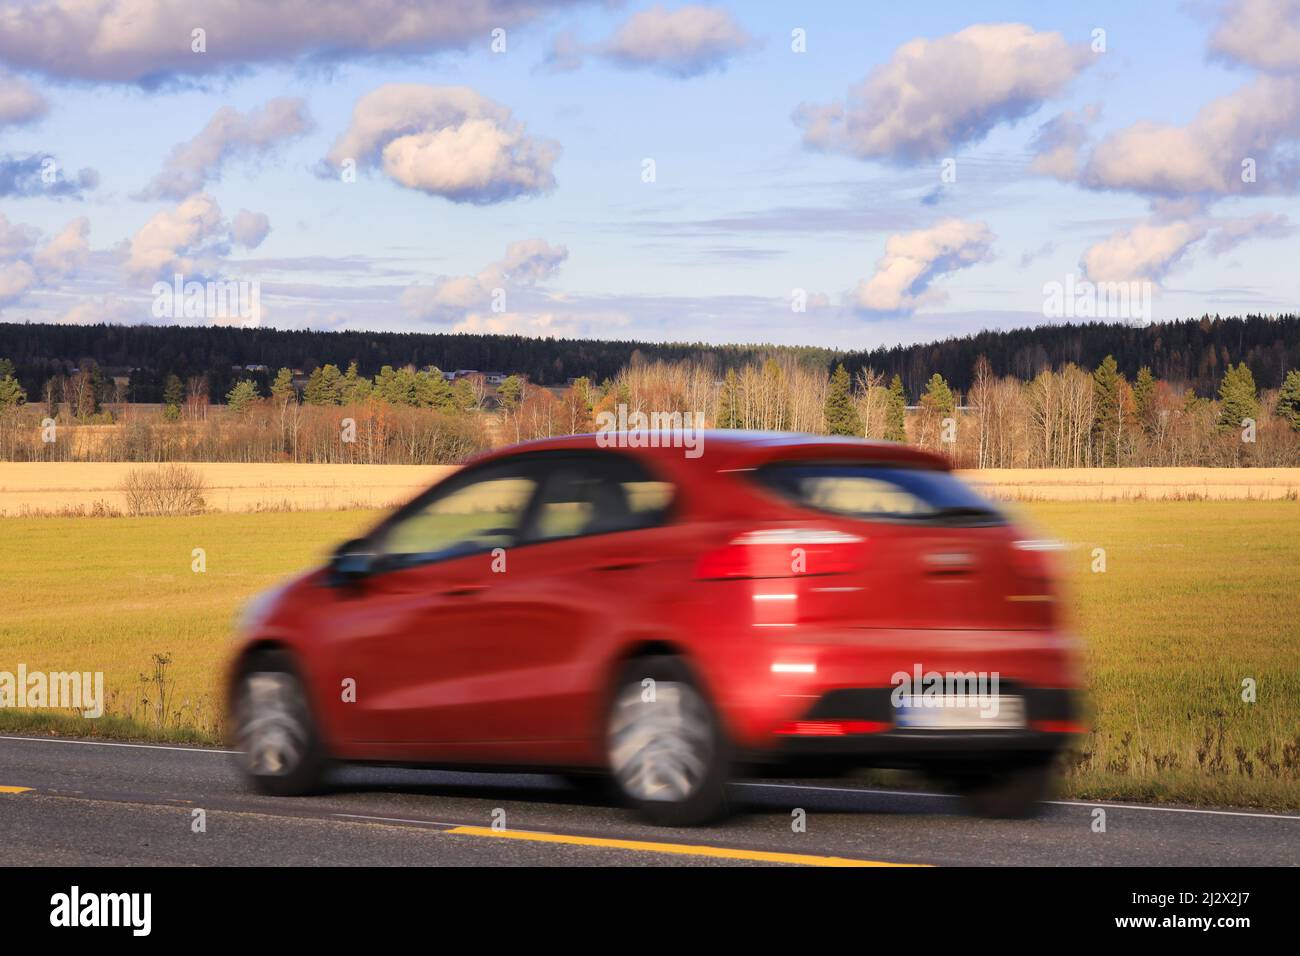 Red car at speed on road on a beautiful day of autumn, side view, in-camera motion blur. Stock Photo